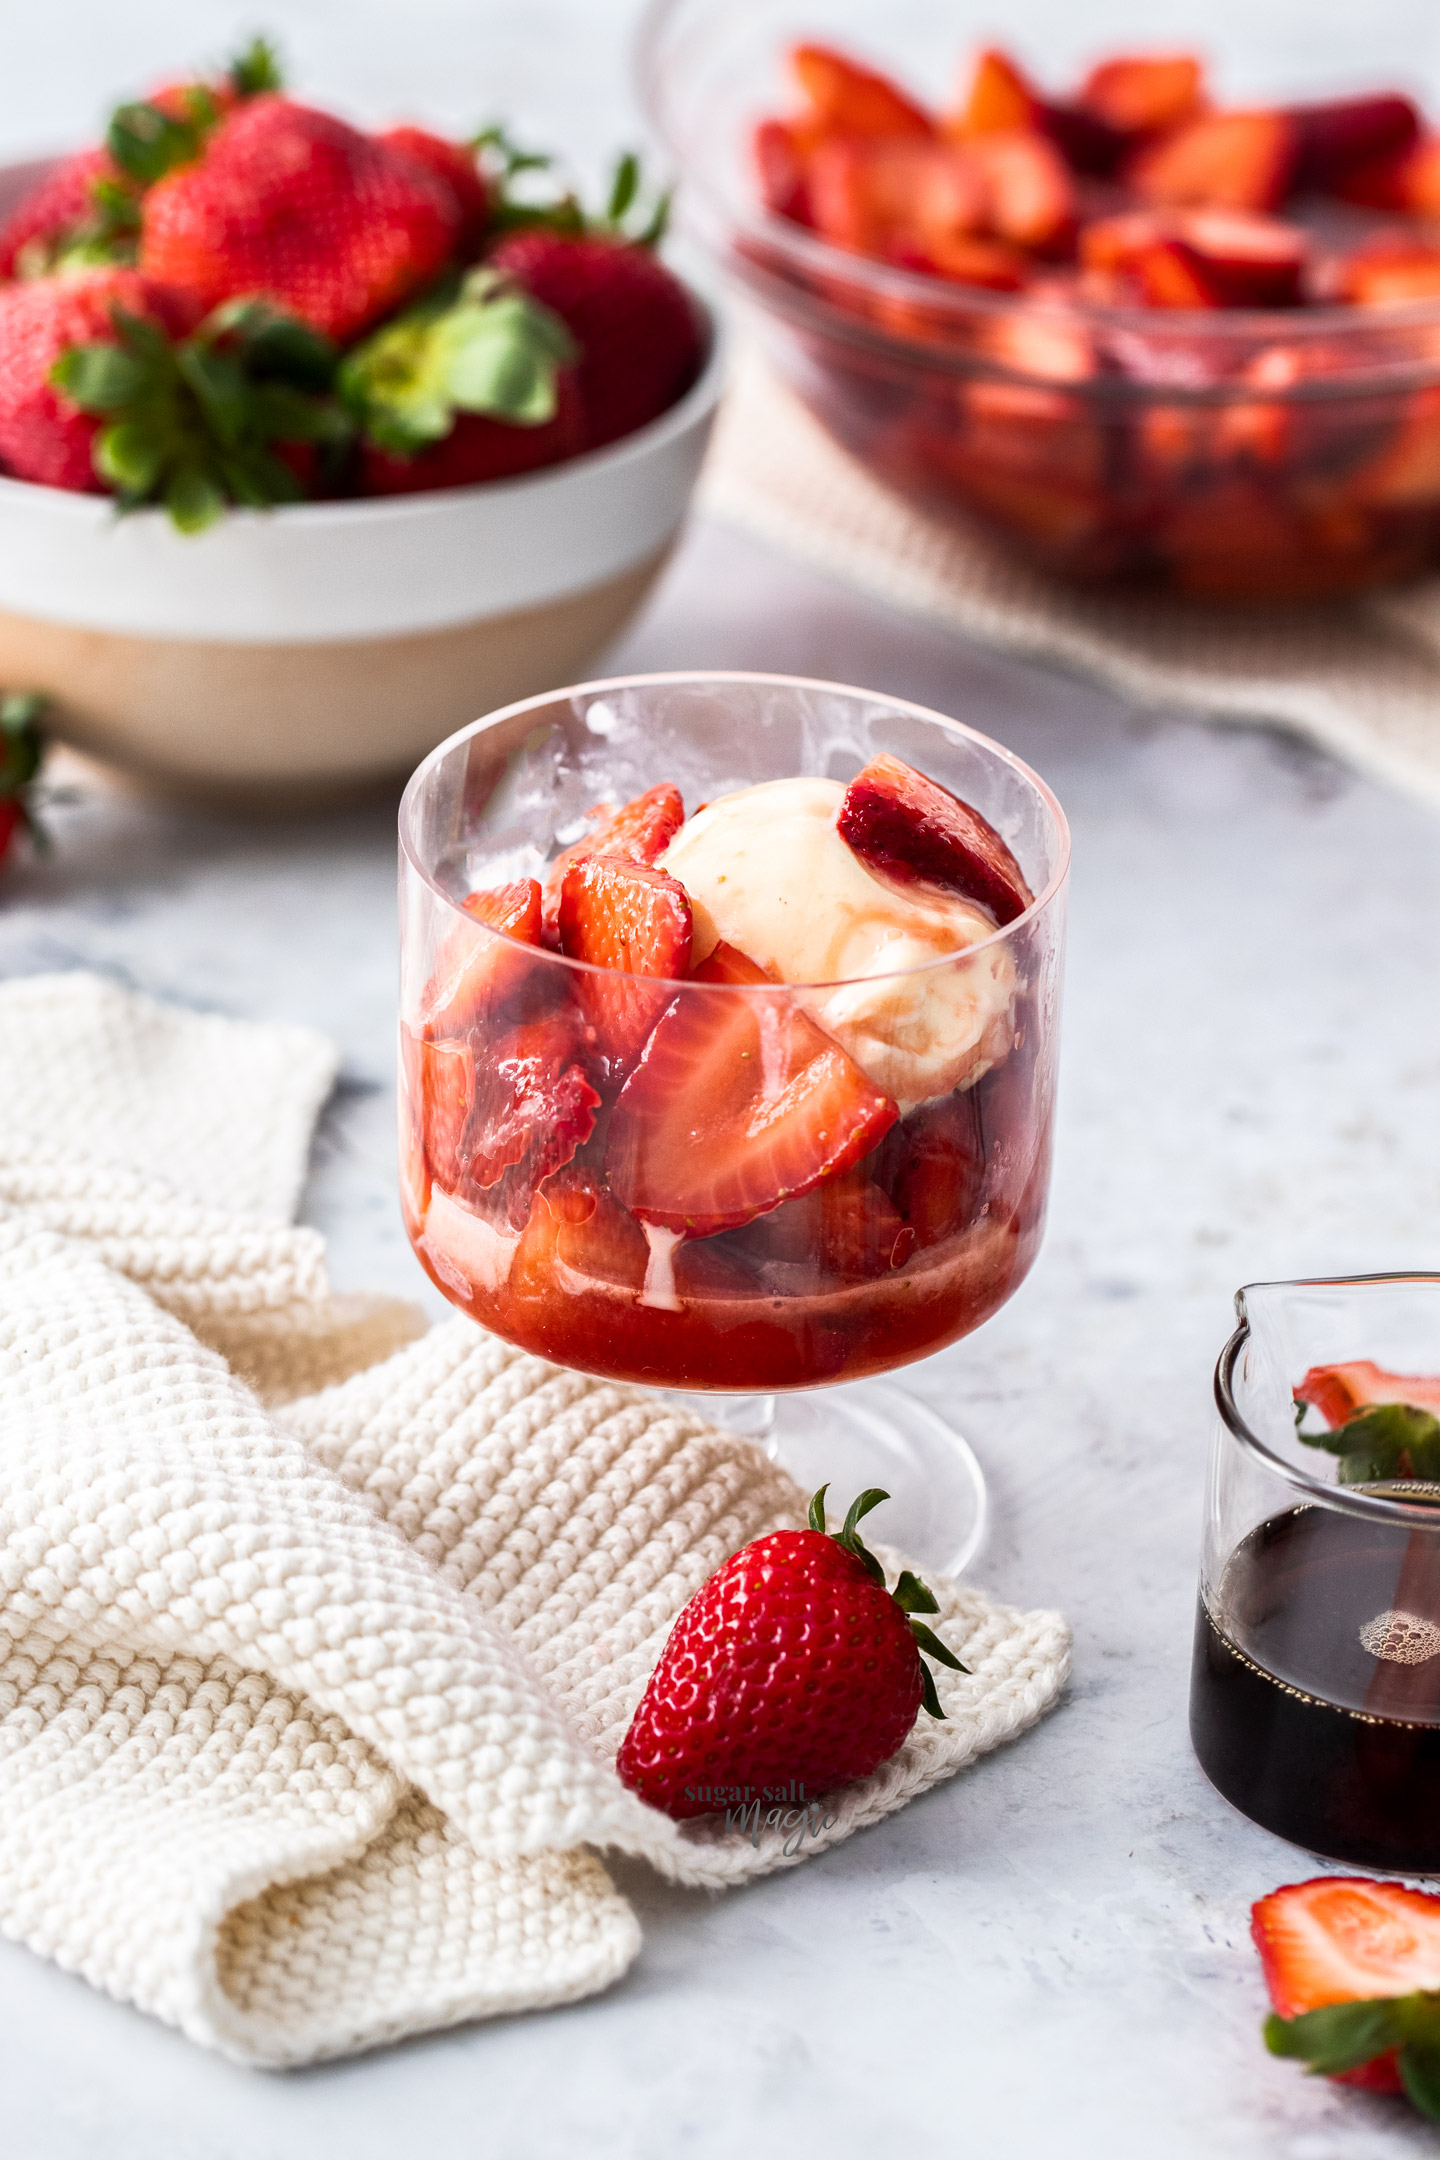 Macerated strawberries over some ice cream in a glass.